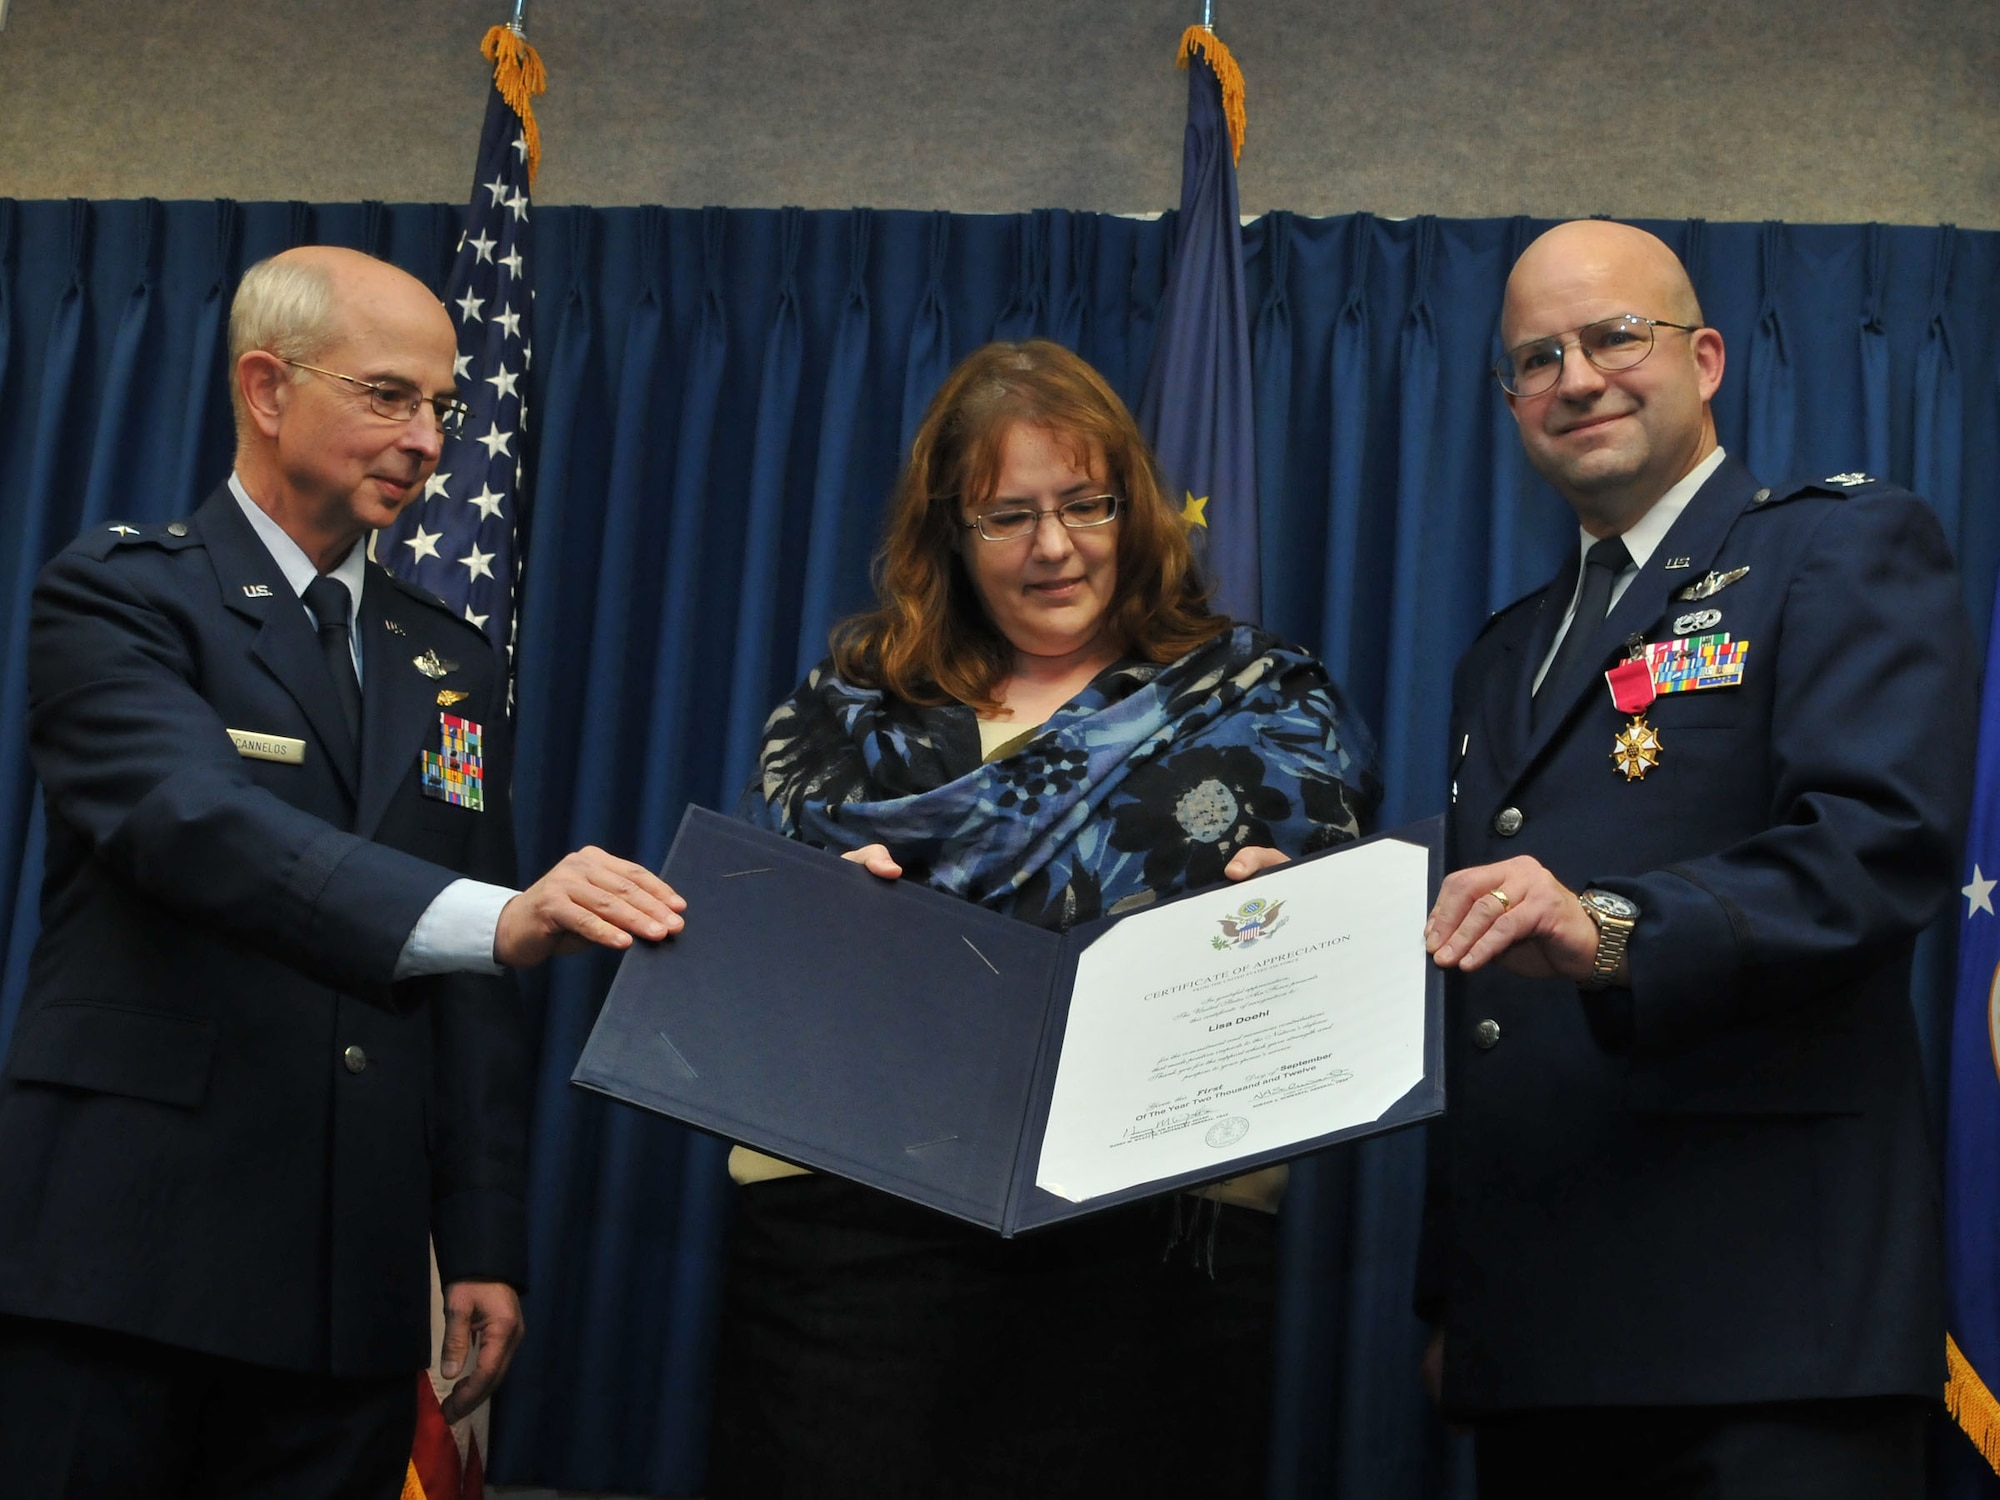 JOINT BASE ELMENDORF-RICHARDSON, Alaska - Col. Robert A. K. Doehl, the 176 Wing vice commander, celebrates his retirement here Sep. 23. Lisa Doehl, his wife, received an appreciation award. Alaska Air National Guard photo by Staff Sgt. N. Alicia Goldberger